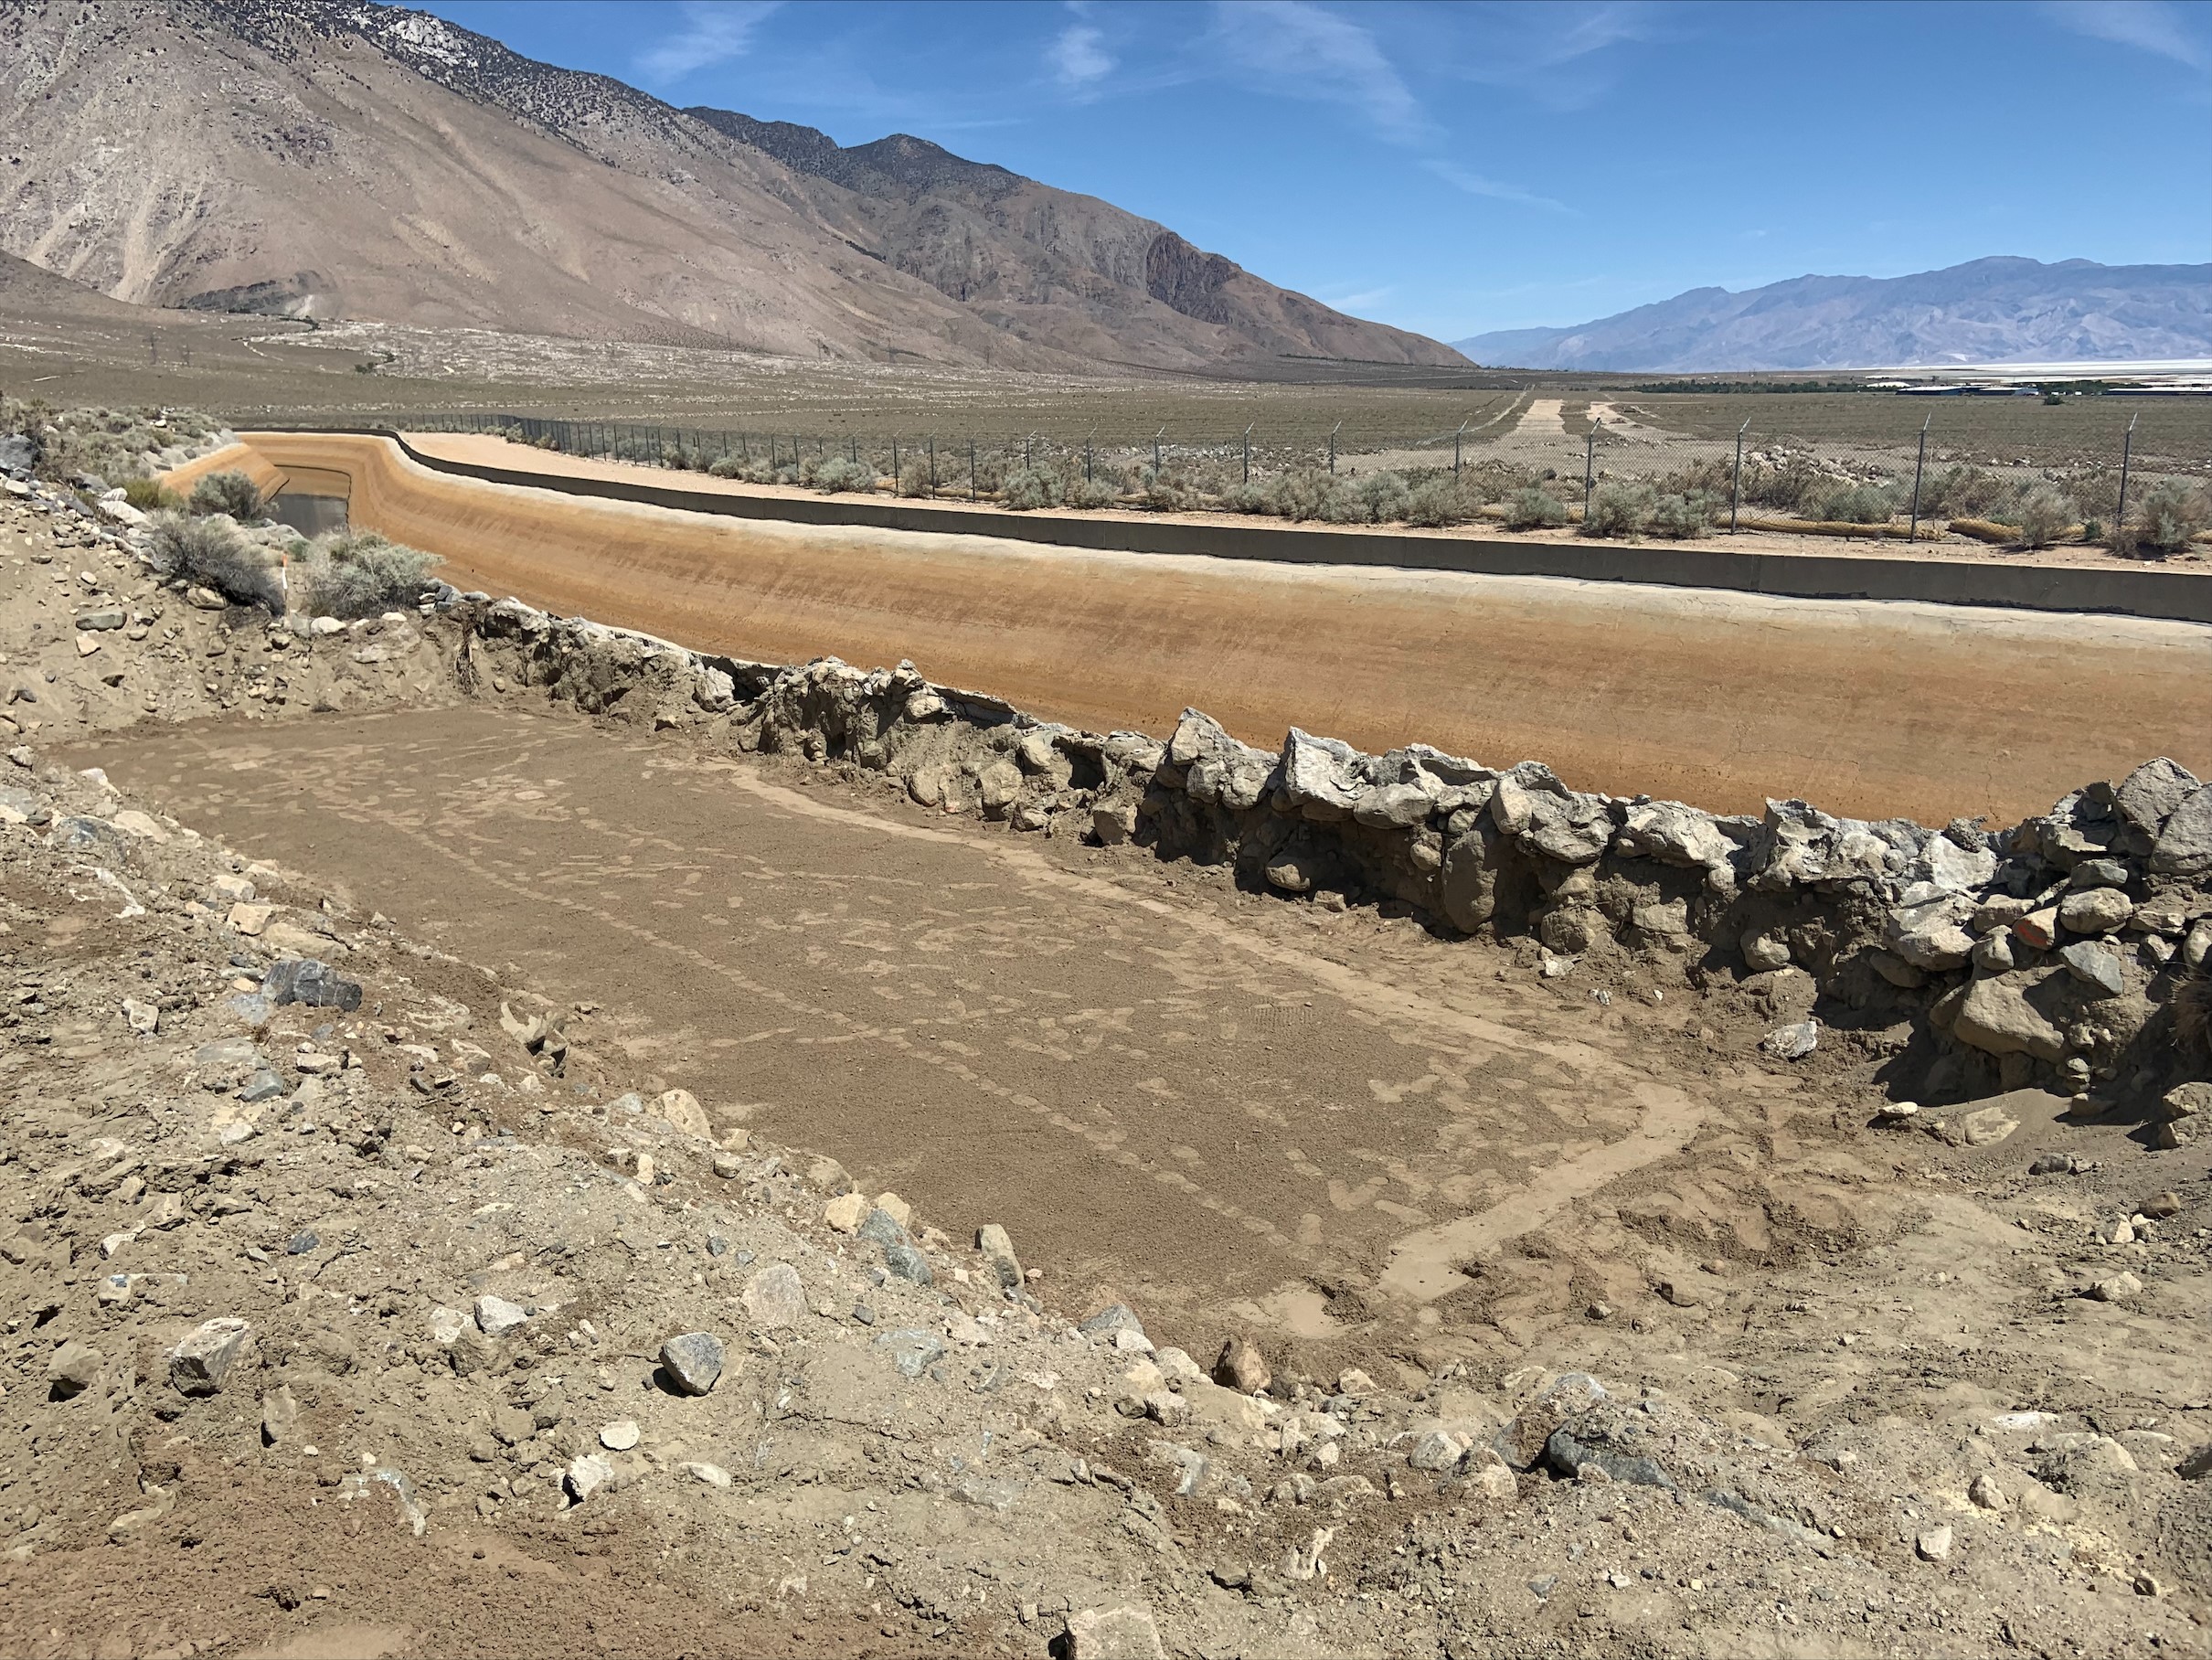 The foundation for the bridge abutment over the Los Angeles Aqueduct is being prepared.